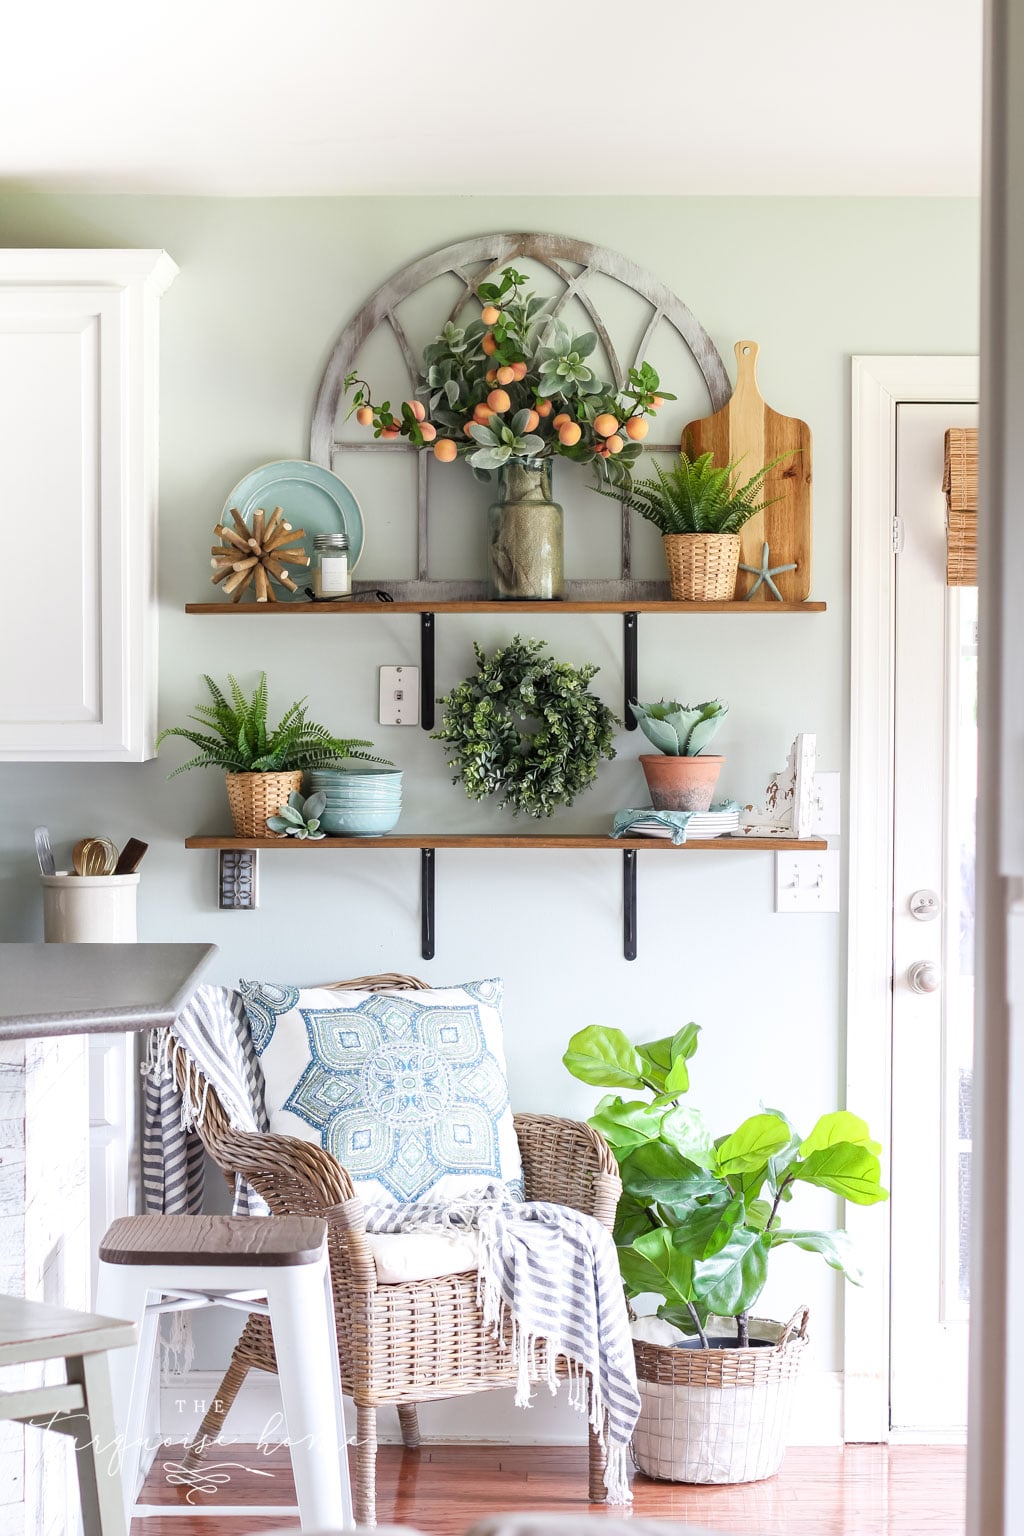 A Simple Peachy Summer Kitchen with gorgeous open shelves, turquoise plates, peach stems and fiddle leaf fig